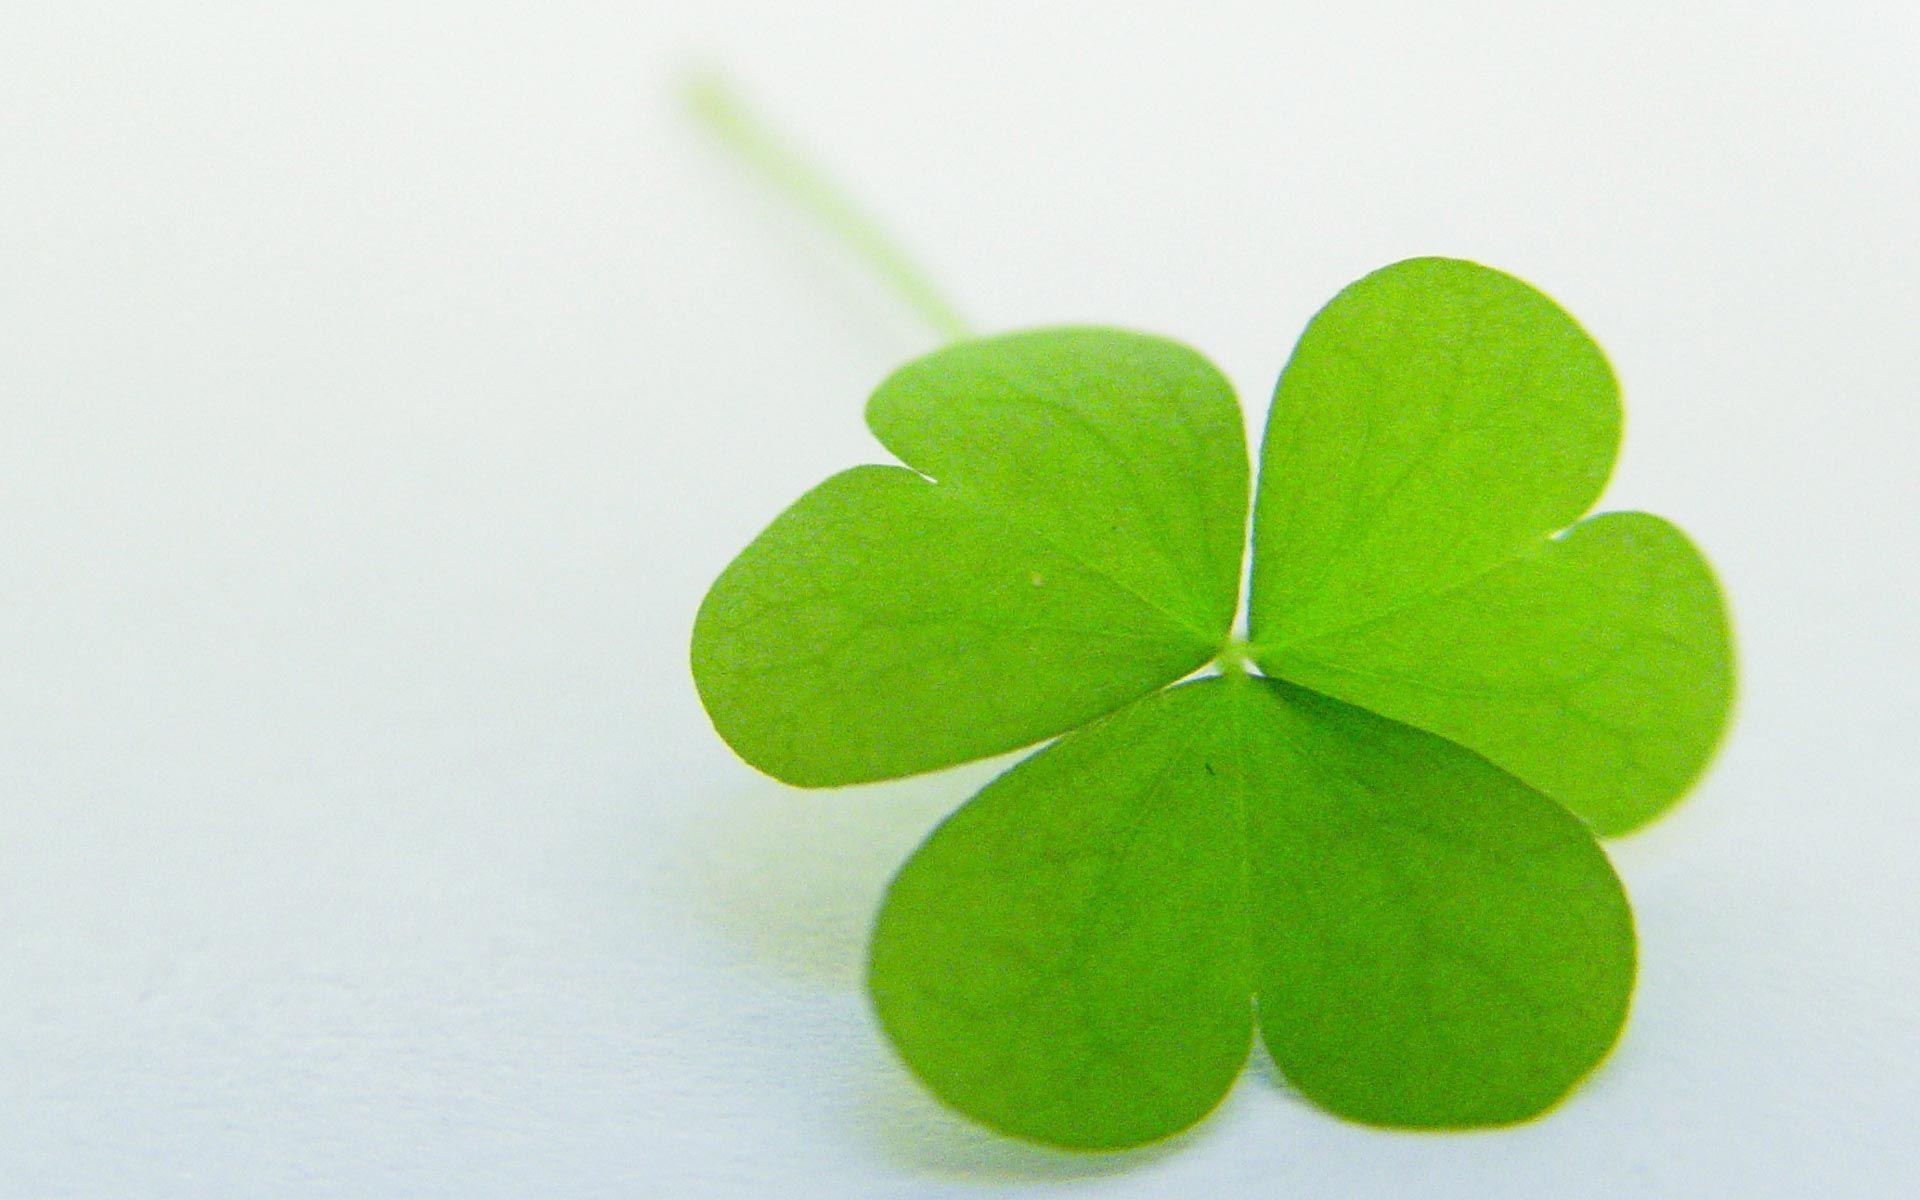 Most Downloaded Clover Wallpaper HD wallpaper search